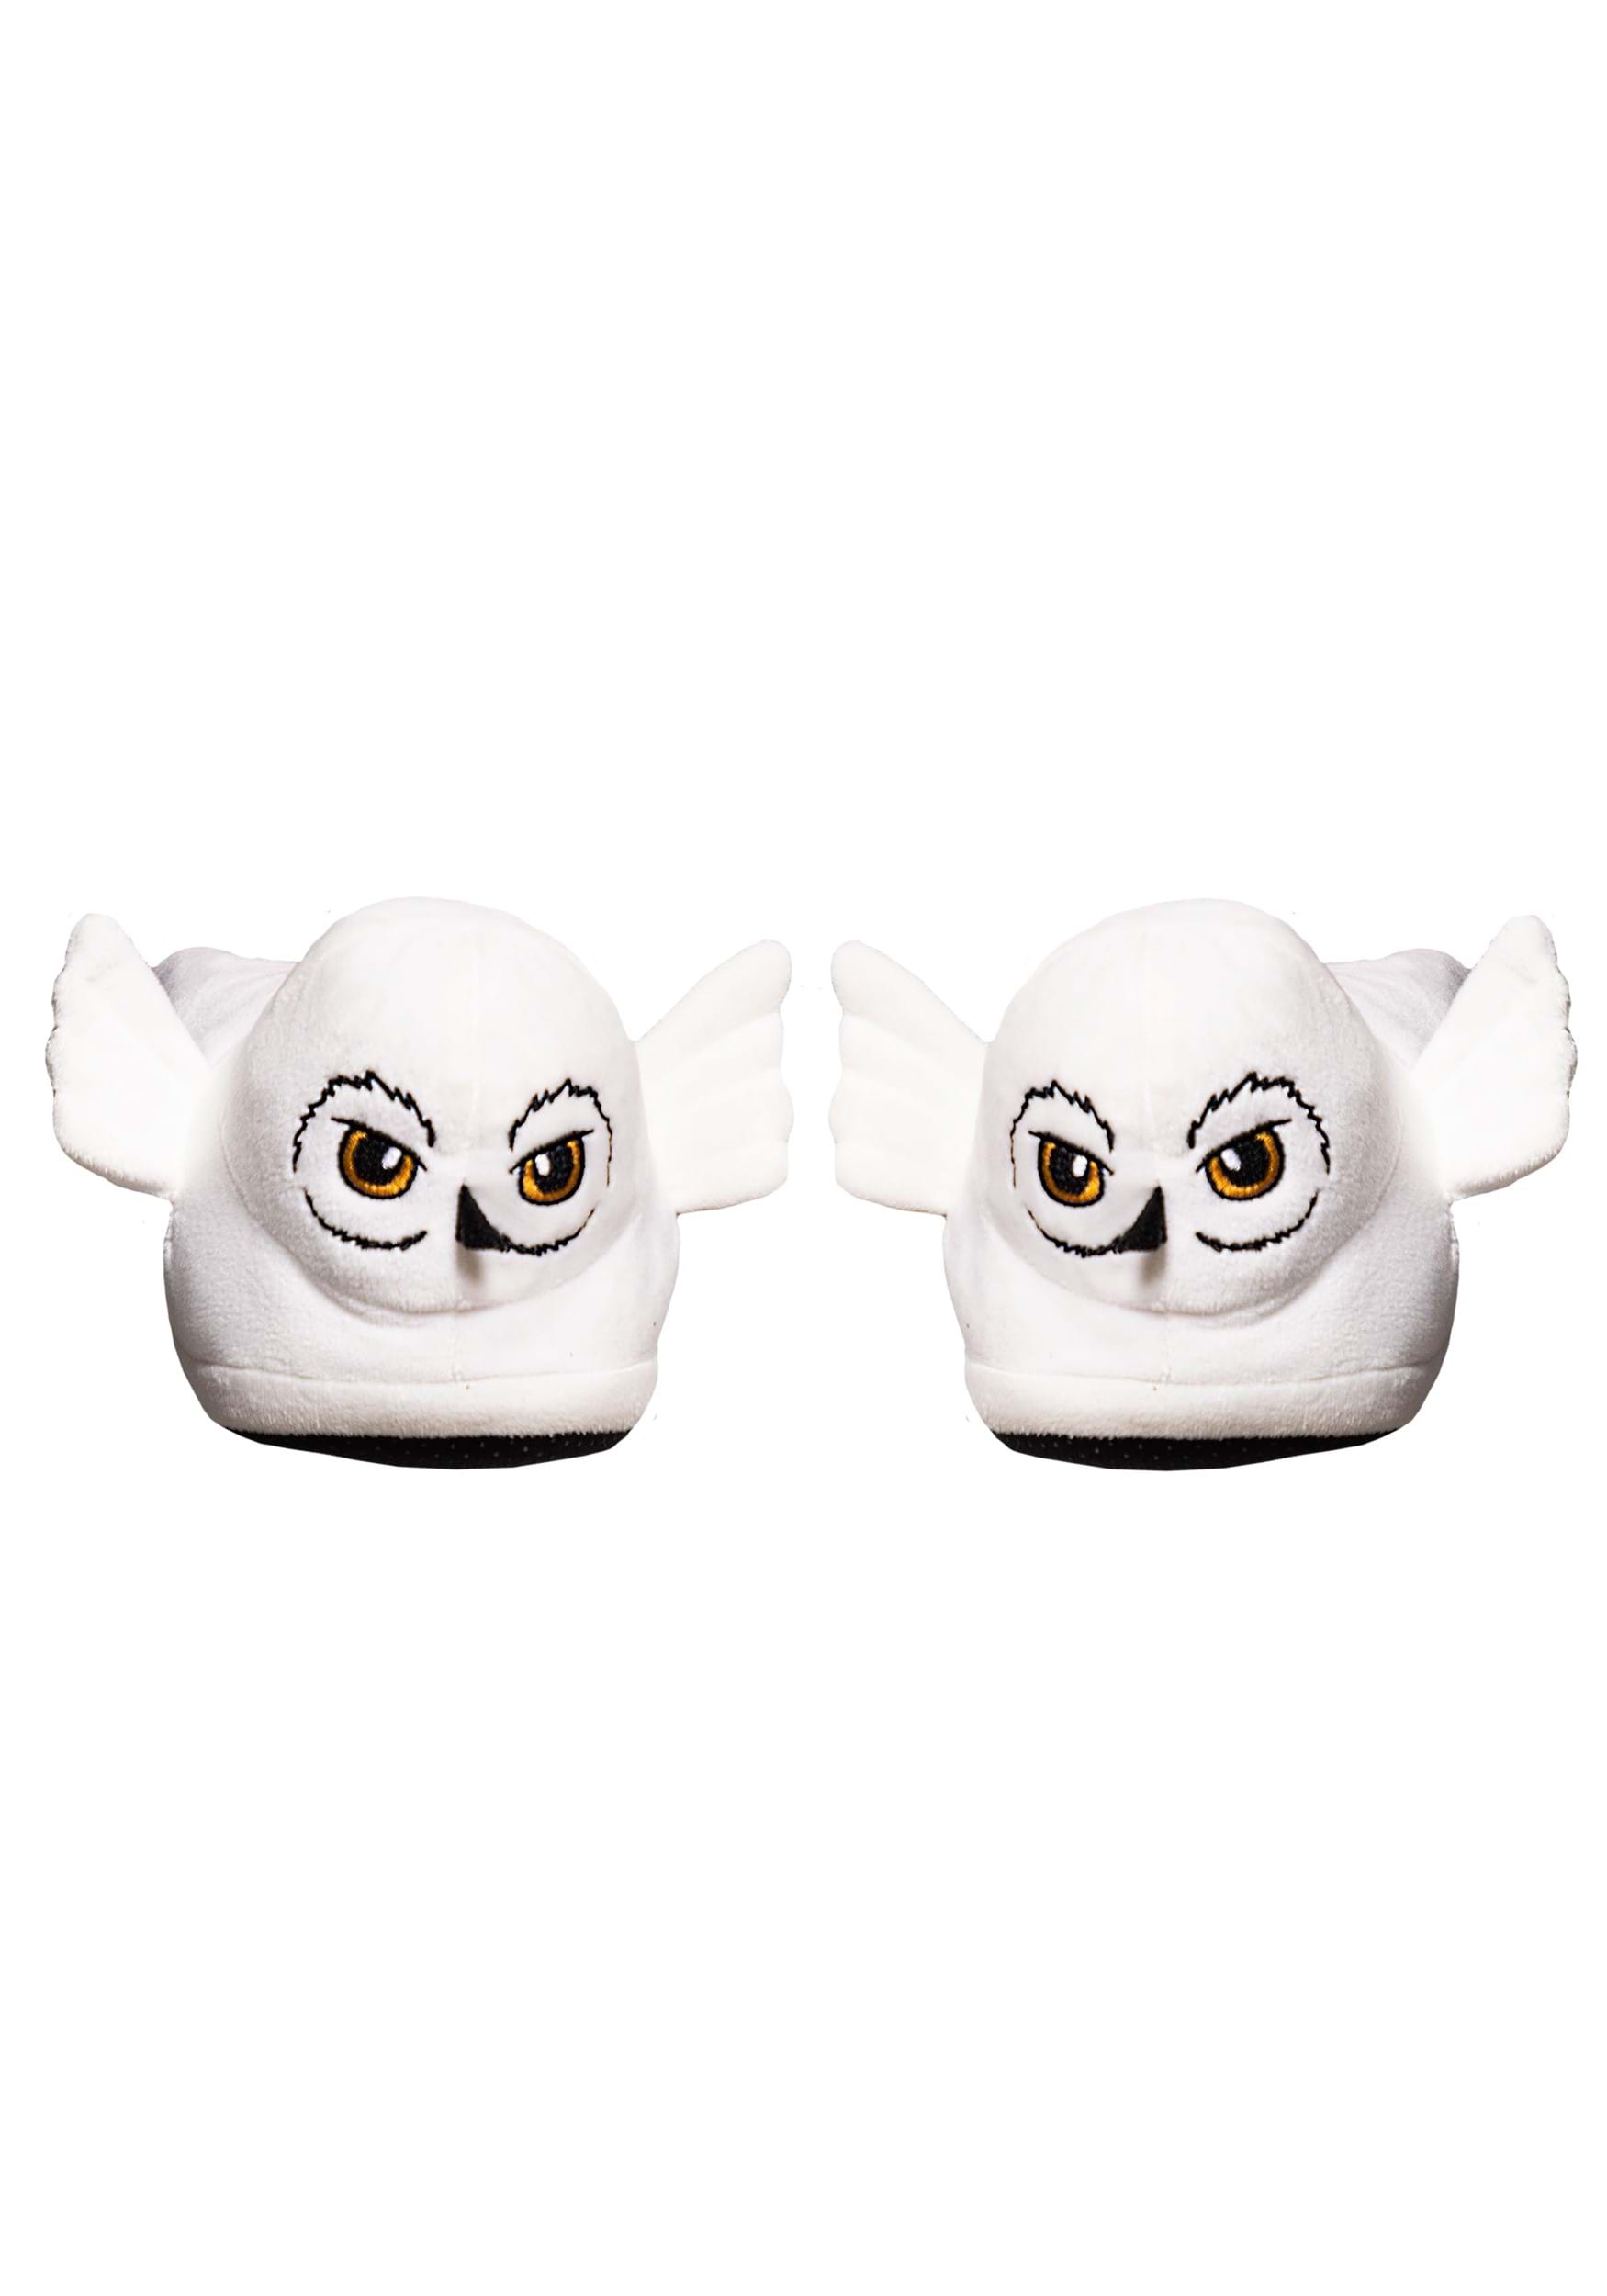 Harry Potter Hedwig Slippers for Adults